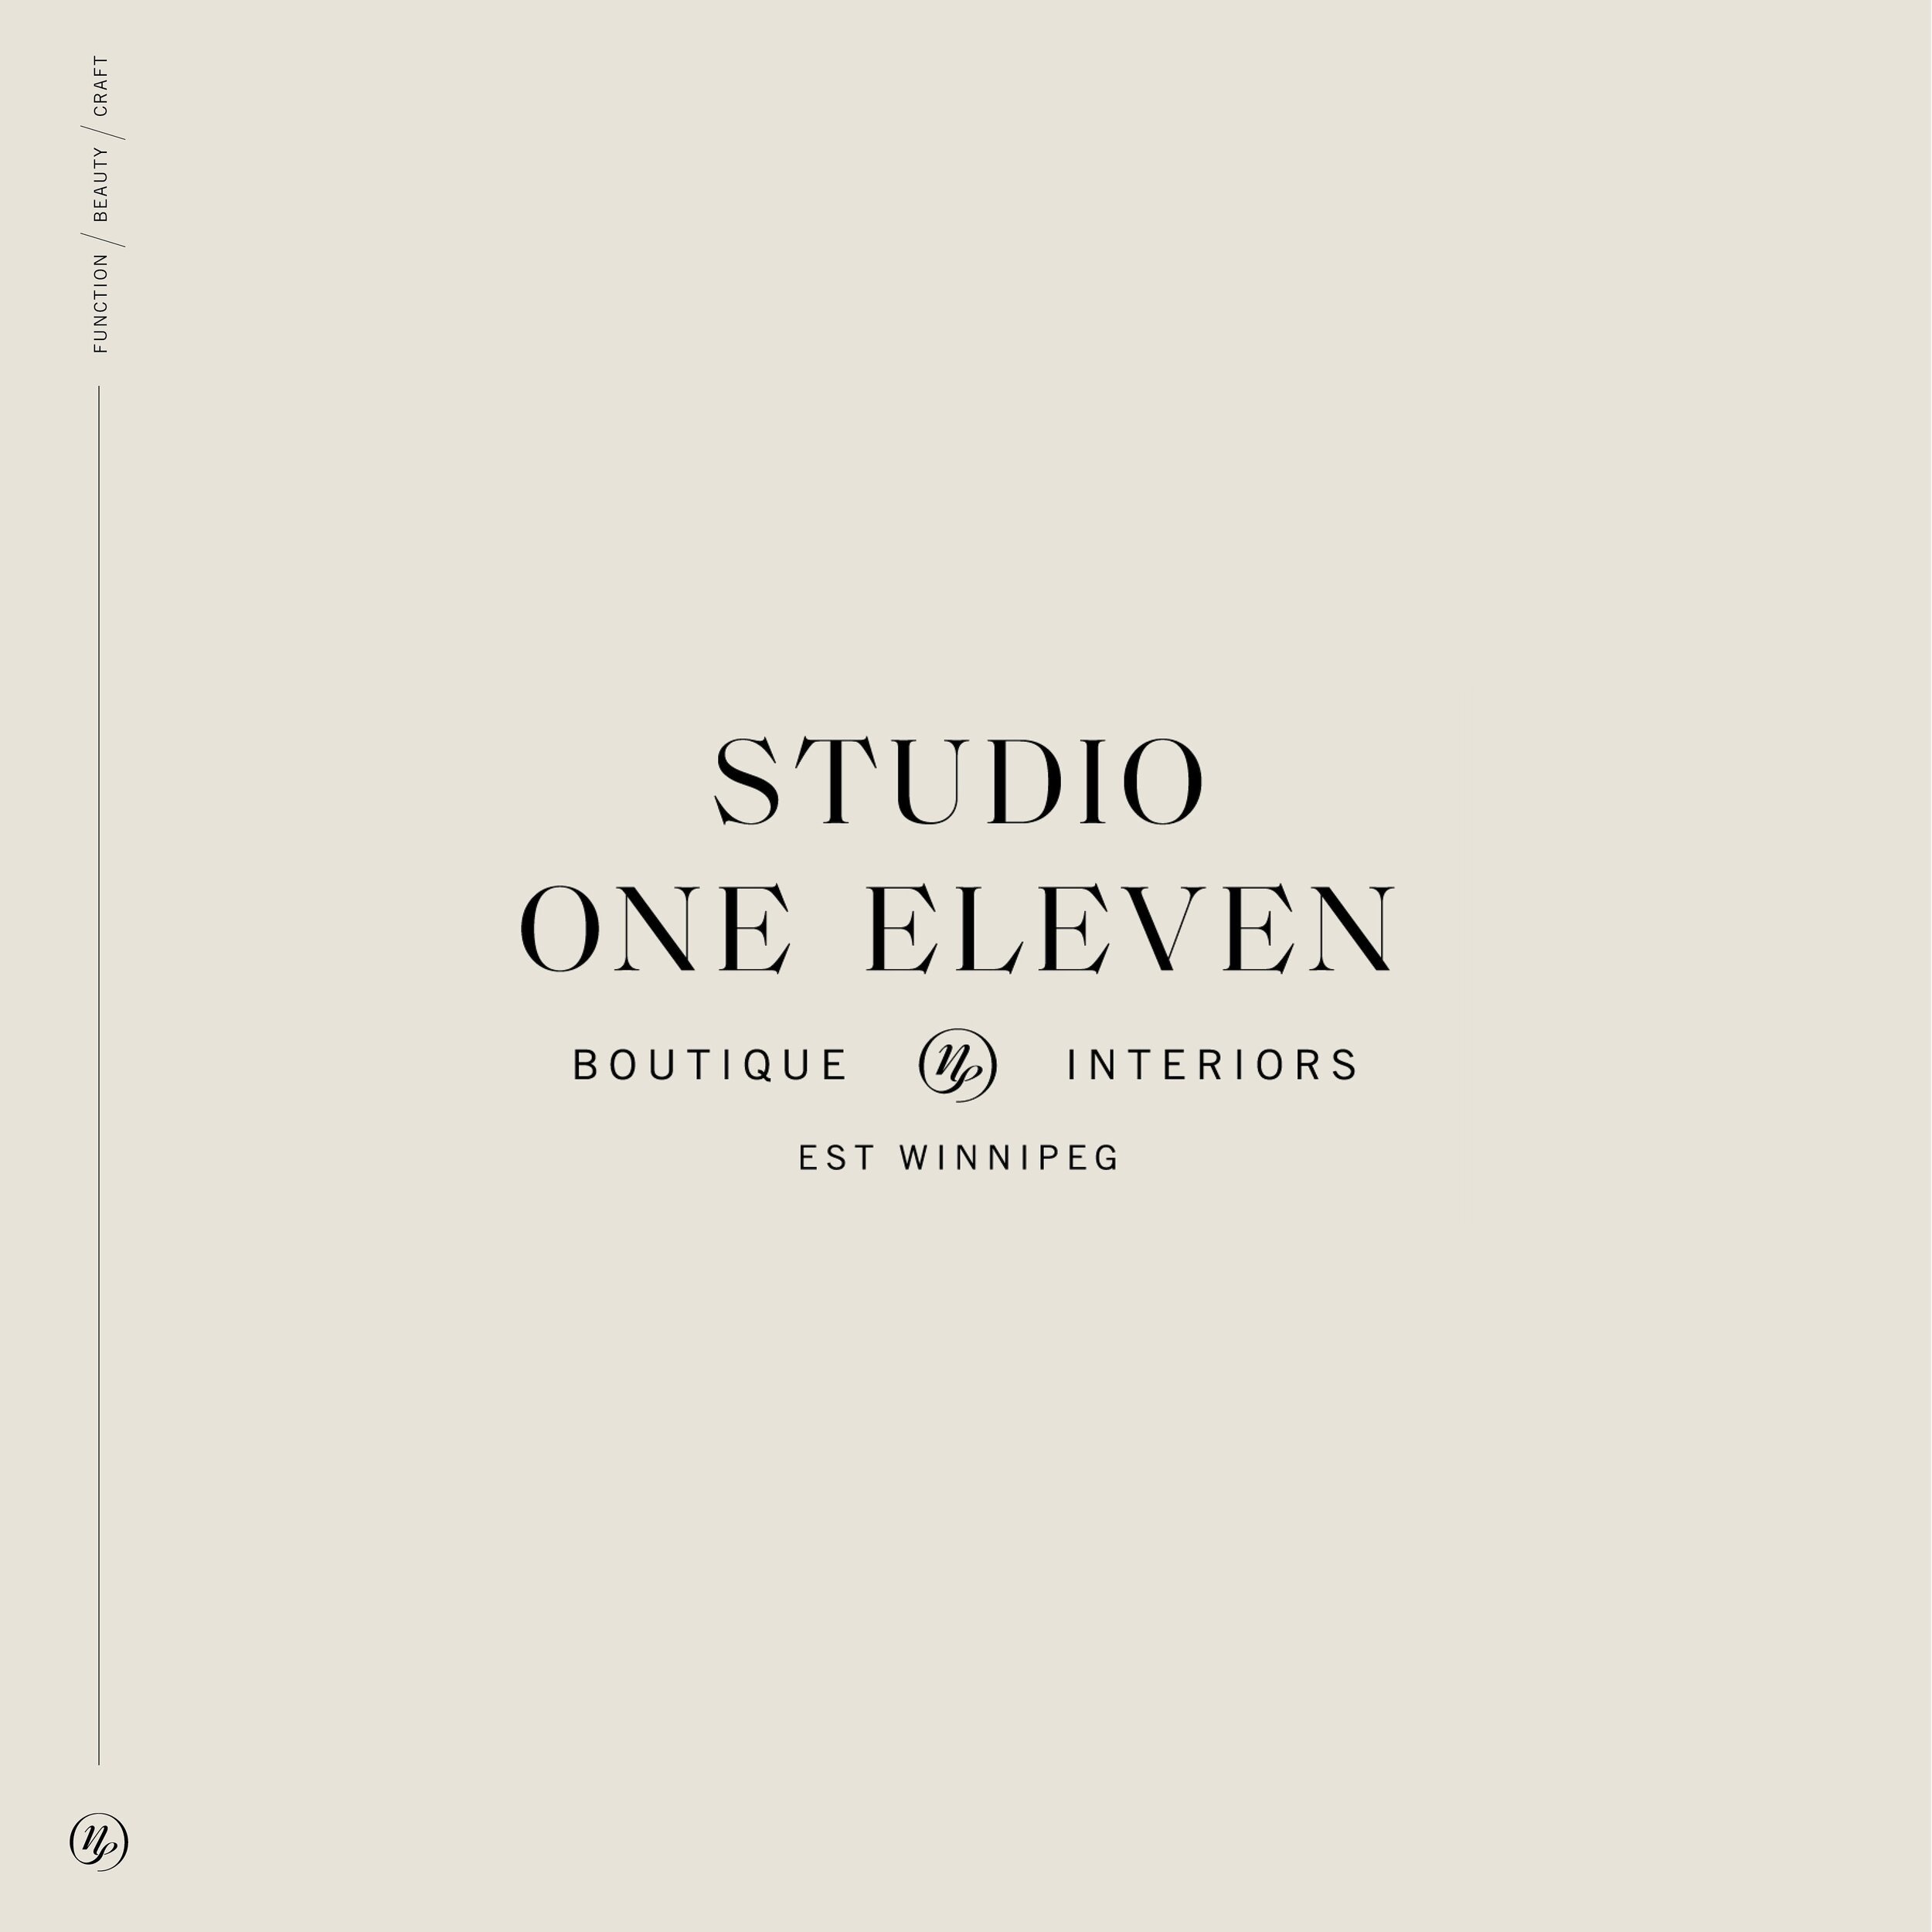 Studio One Eleven ✨

Boutique Interiors Crafted for Work &amp; Life ✨

Function / Beauty / Craft ✨